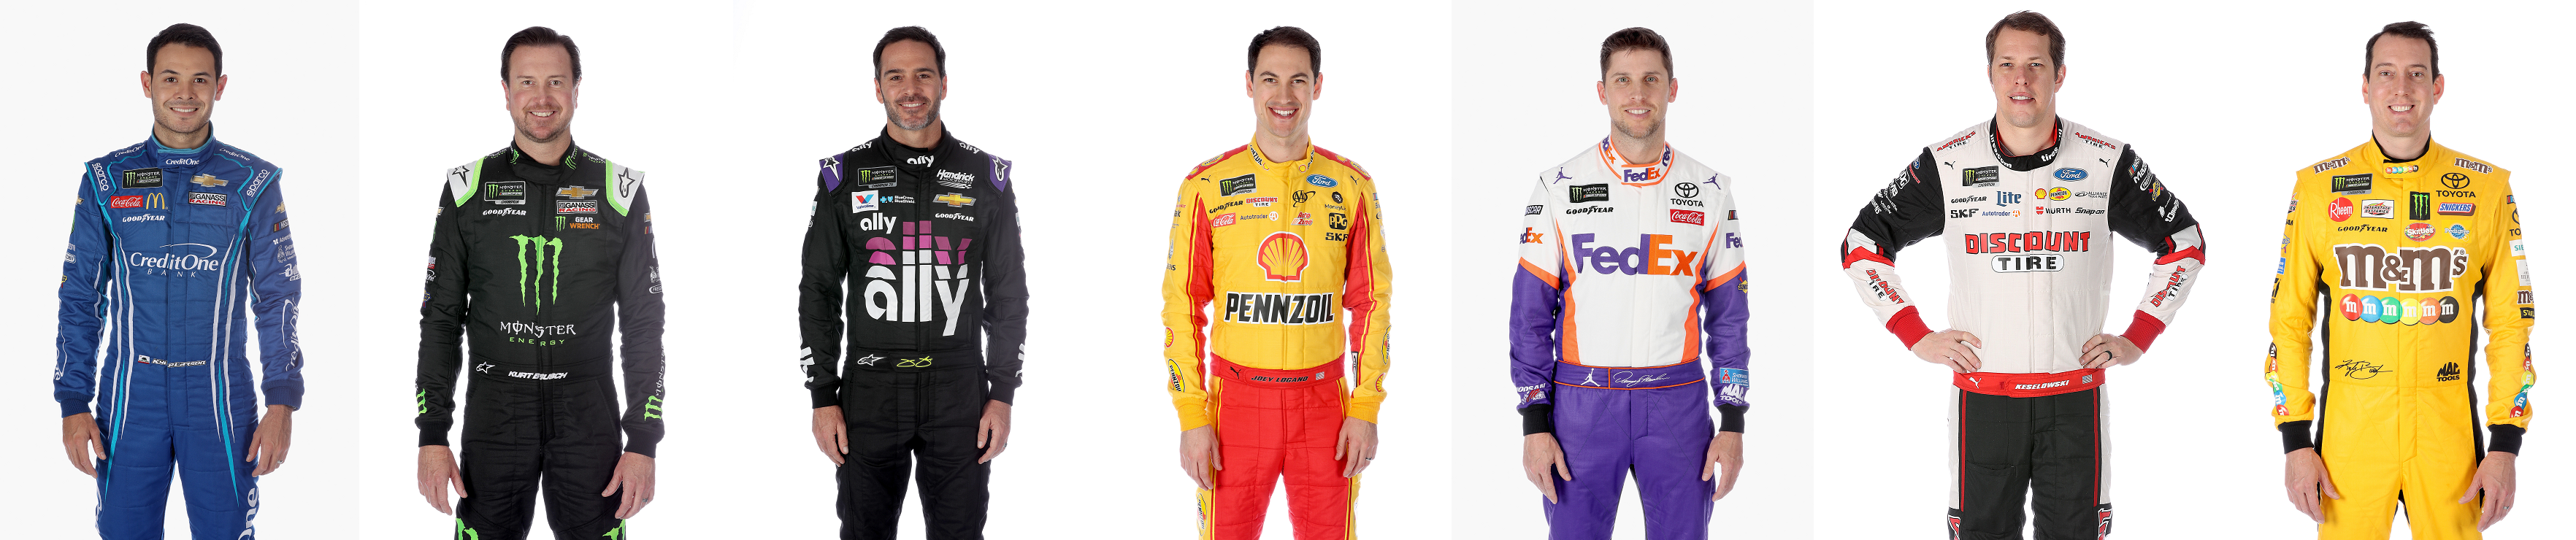 Paradise, lucky seven, one of these drivers may win the Foxwoods Resort Casino 301 at Loudon!